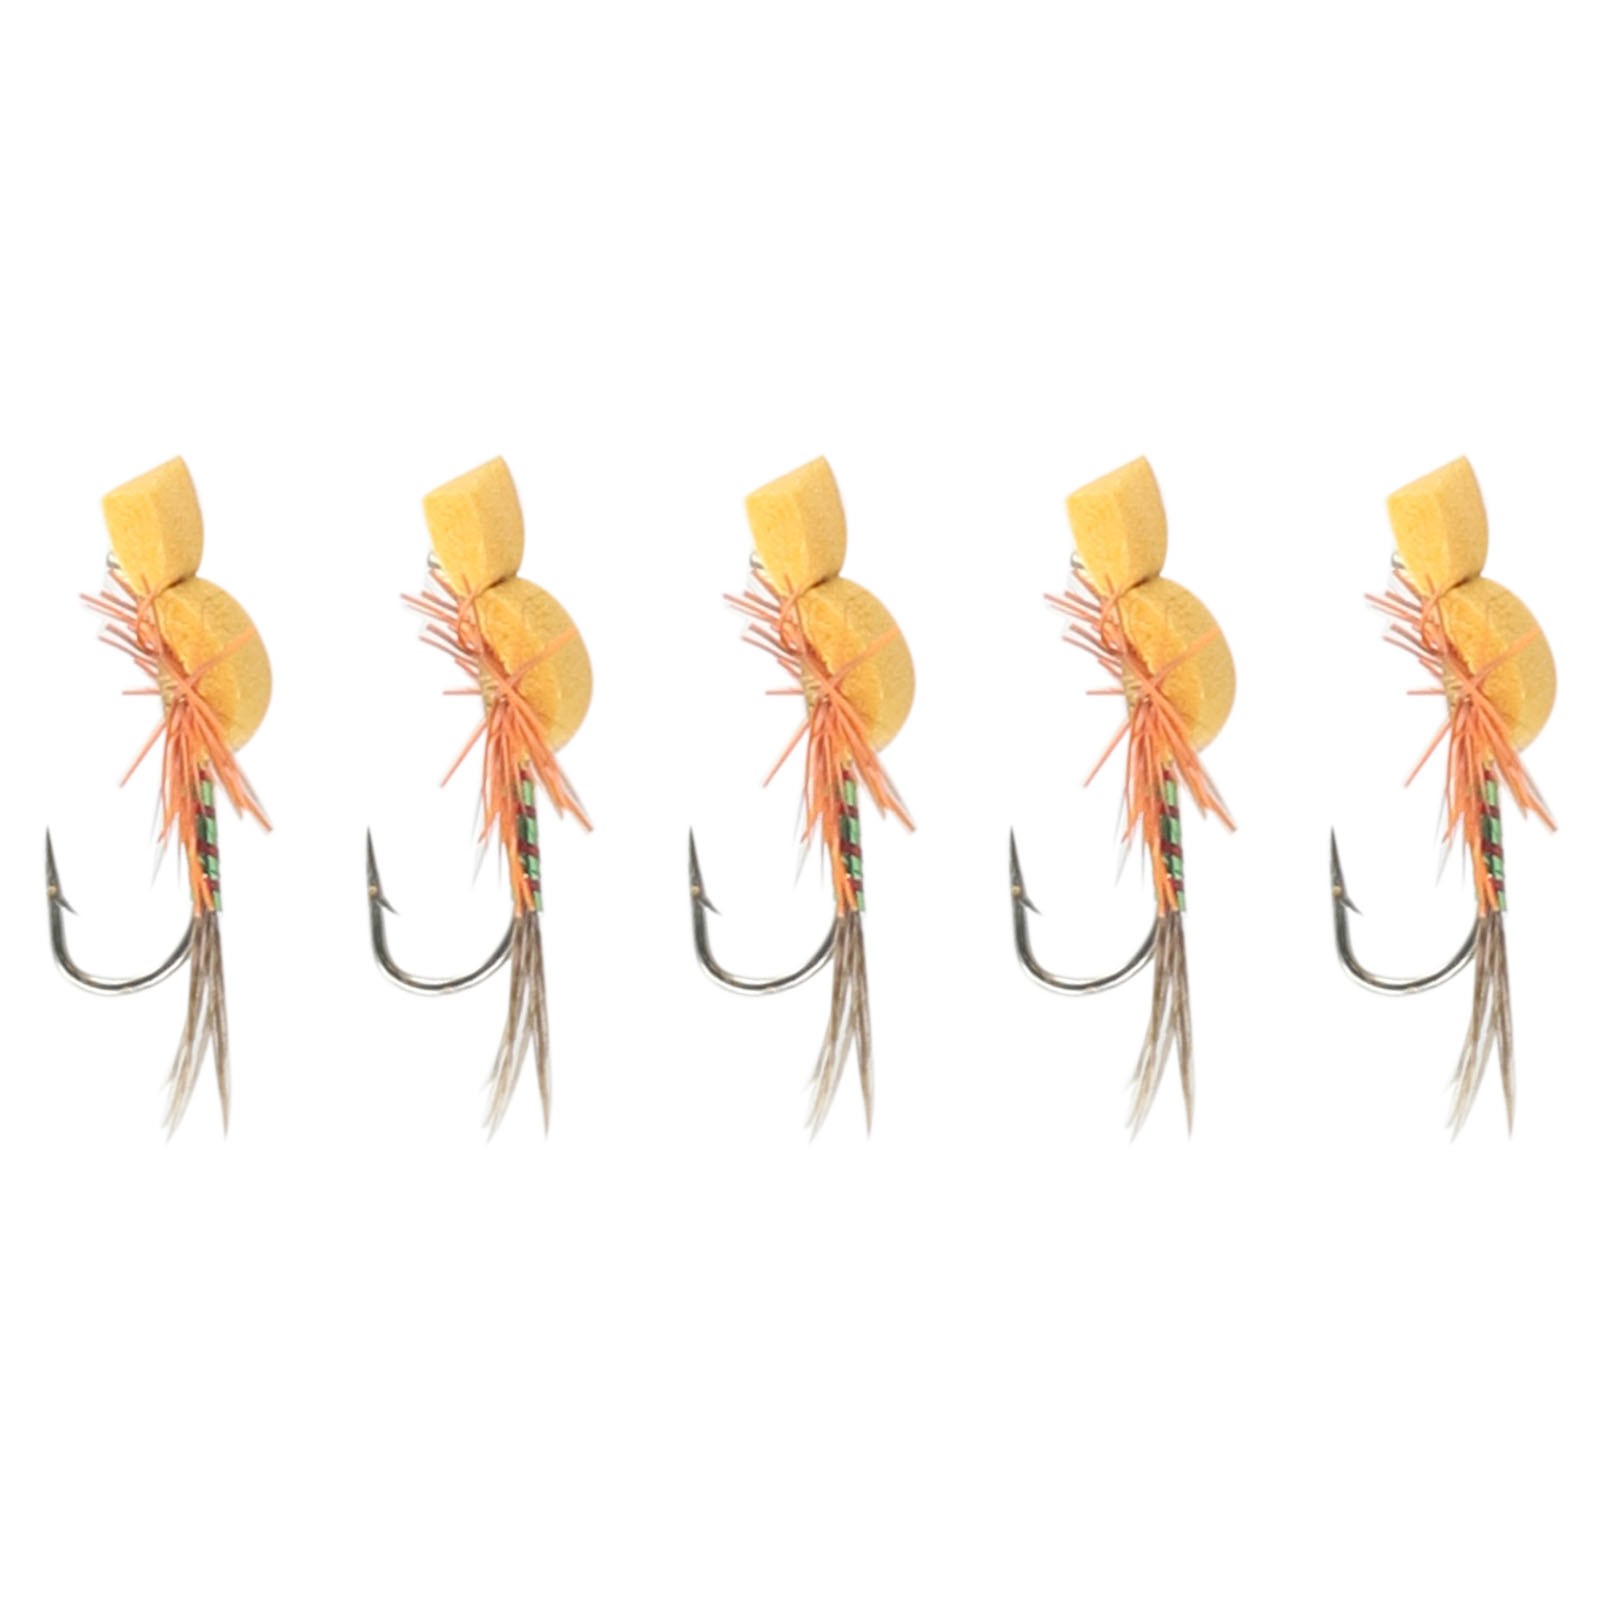 Proven Fly Fishing Bait for Trout Salmon Bass Catfish 5 Pack Dry Flies